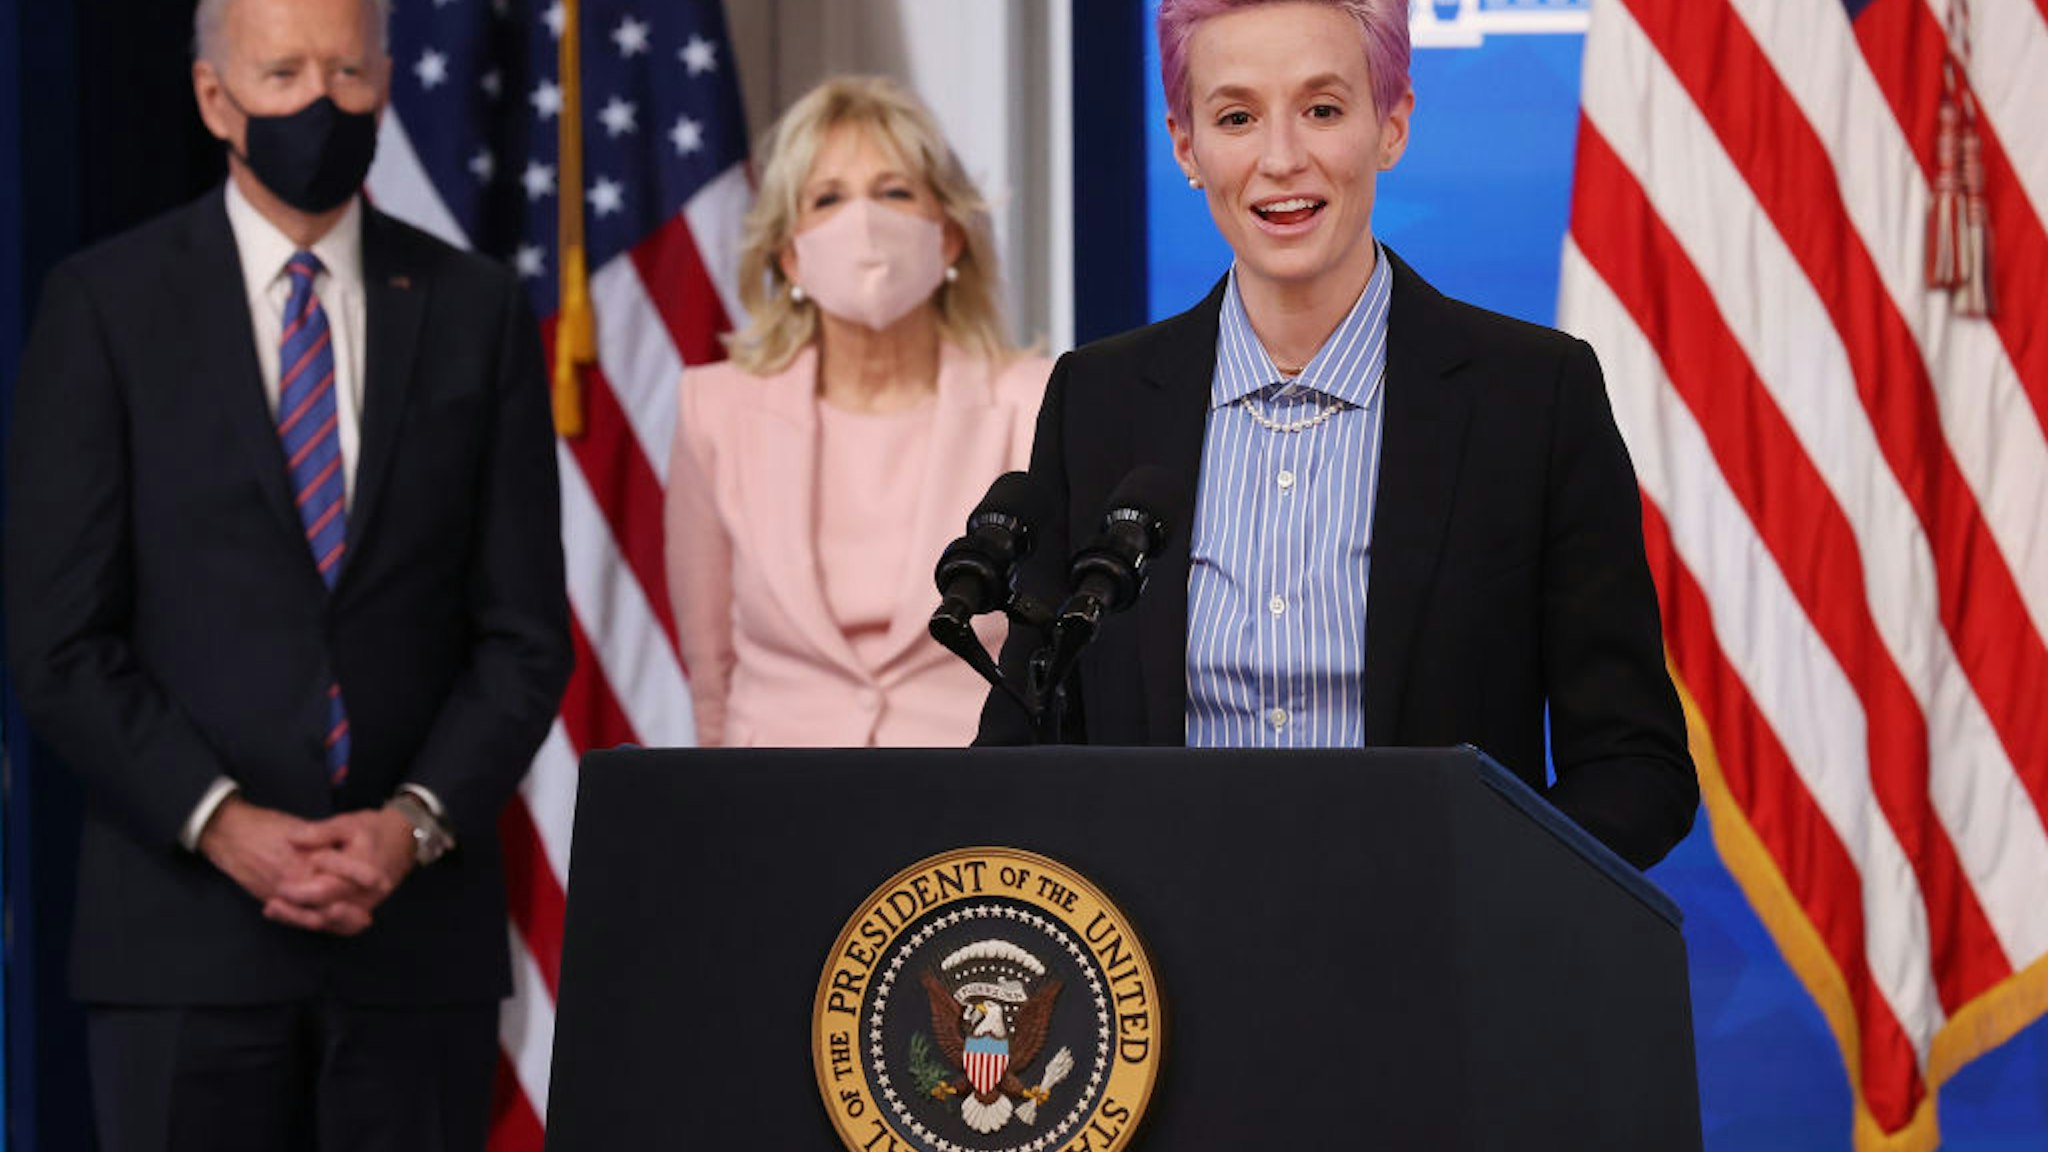 Olympic gold medalist and two-time World Cup champion soccer player Megan Rapinoe deliers remarks during and event to mark Equal Pay Day with U.S. President Joe Biden (L) and first lady Dr. Jill Biden in the South Court Auditorium in the Eisenhower Executive Office Building on March 24, 2021 in Washington, DC.